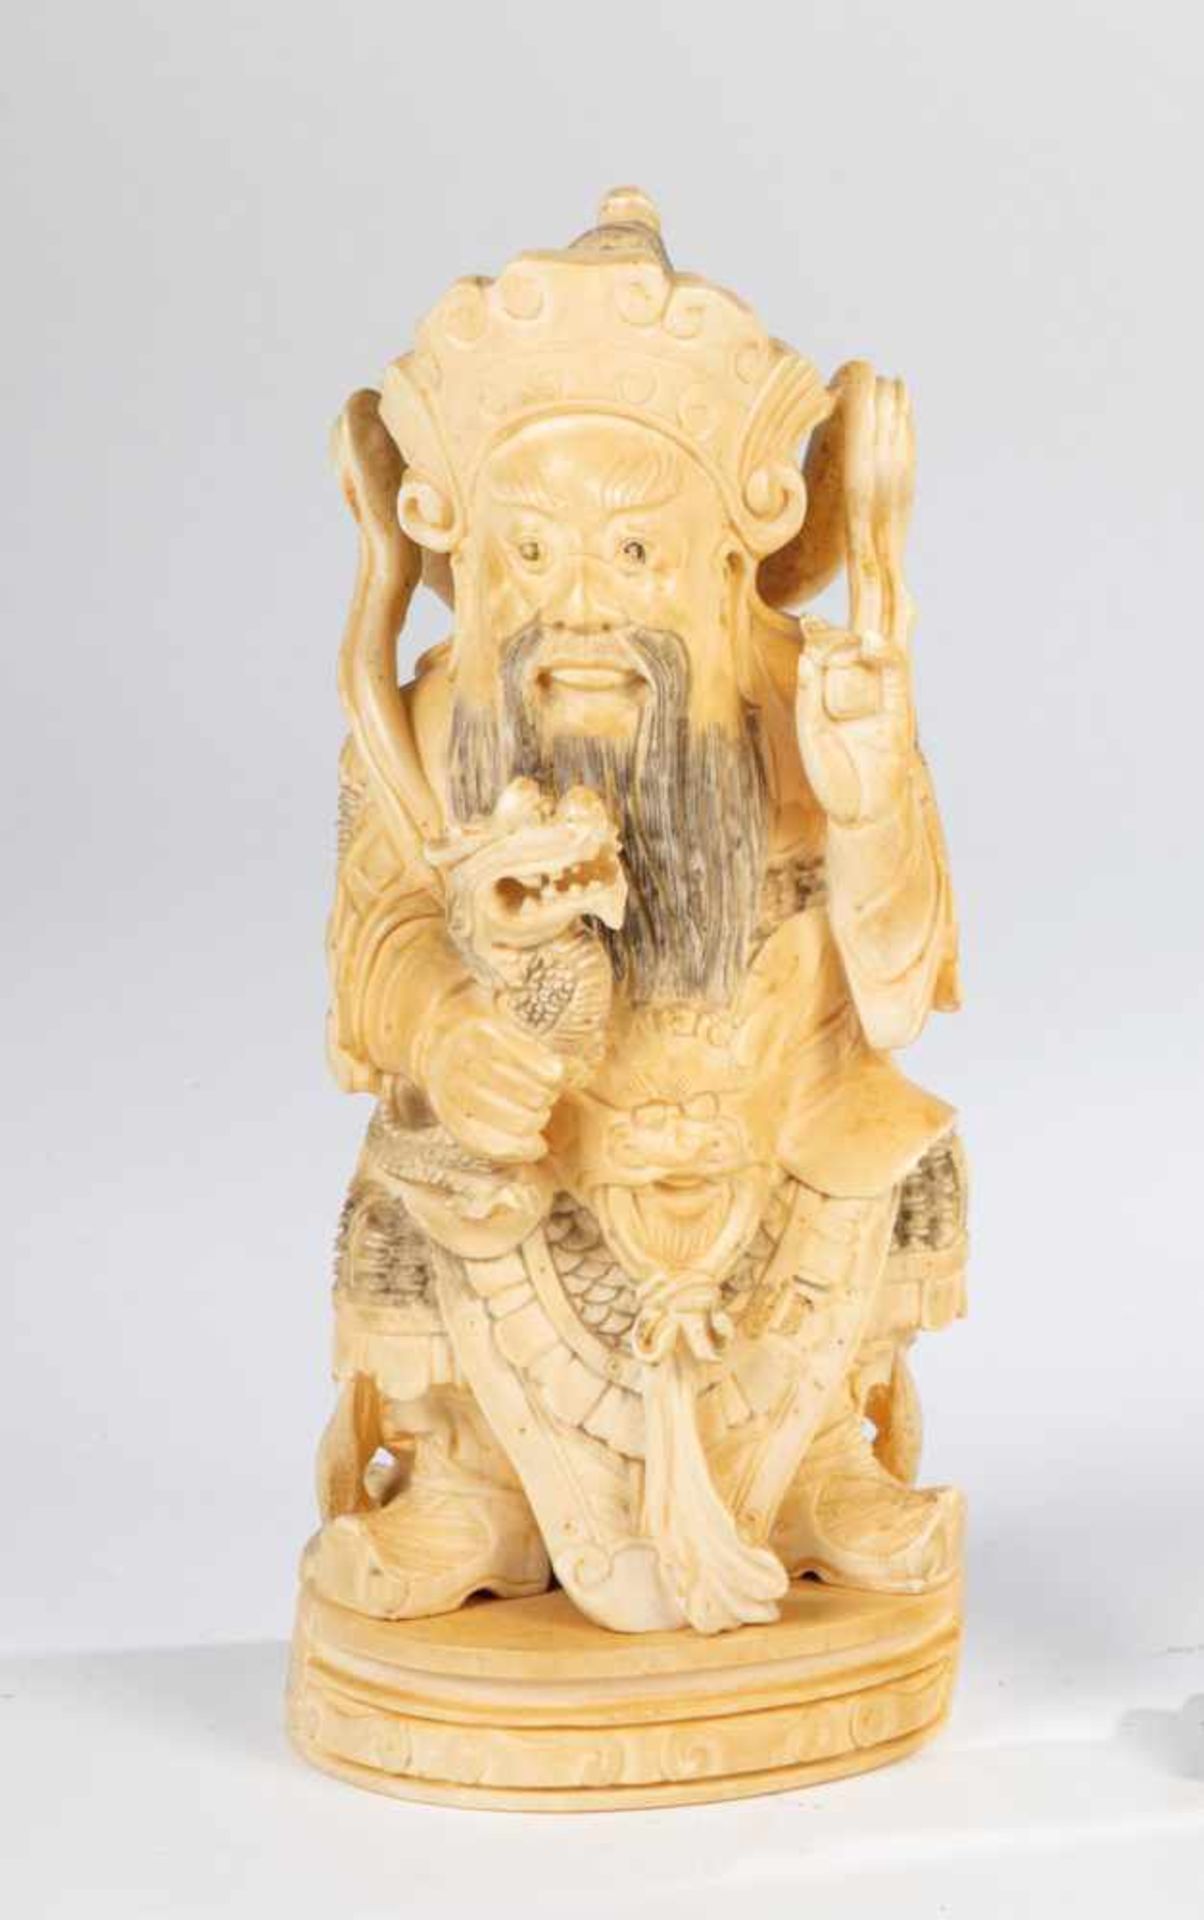 dignitary. China, 19th century. Sitting dignitary with beard and dragon. Inscribed on